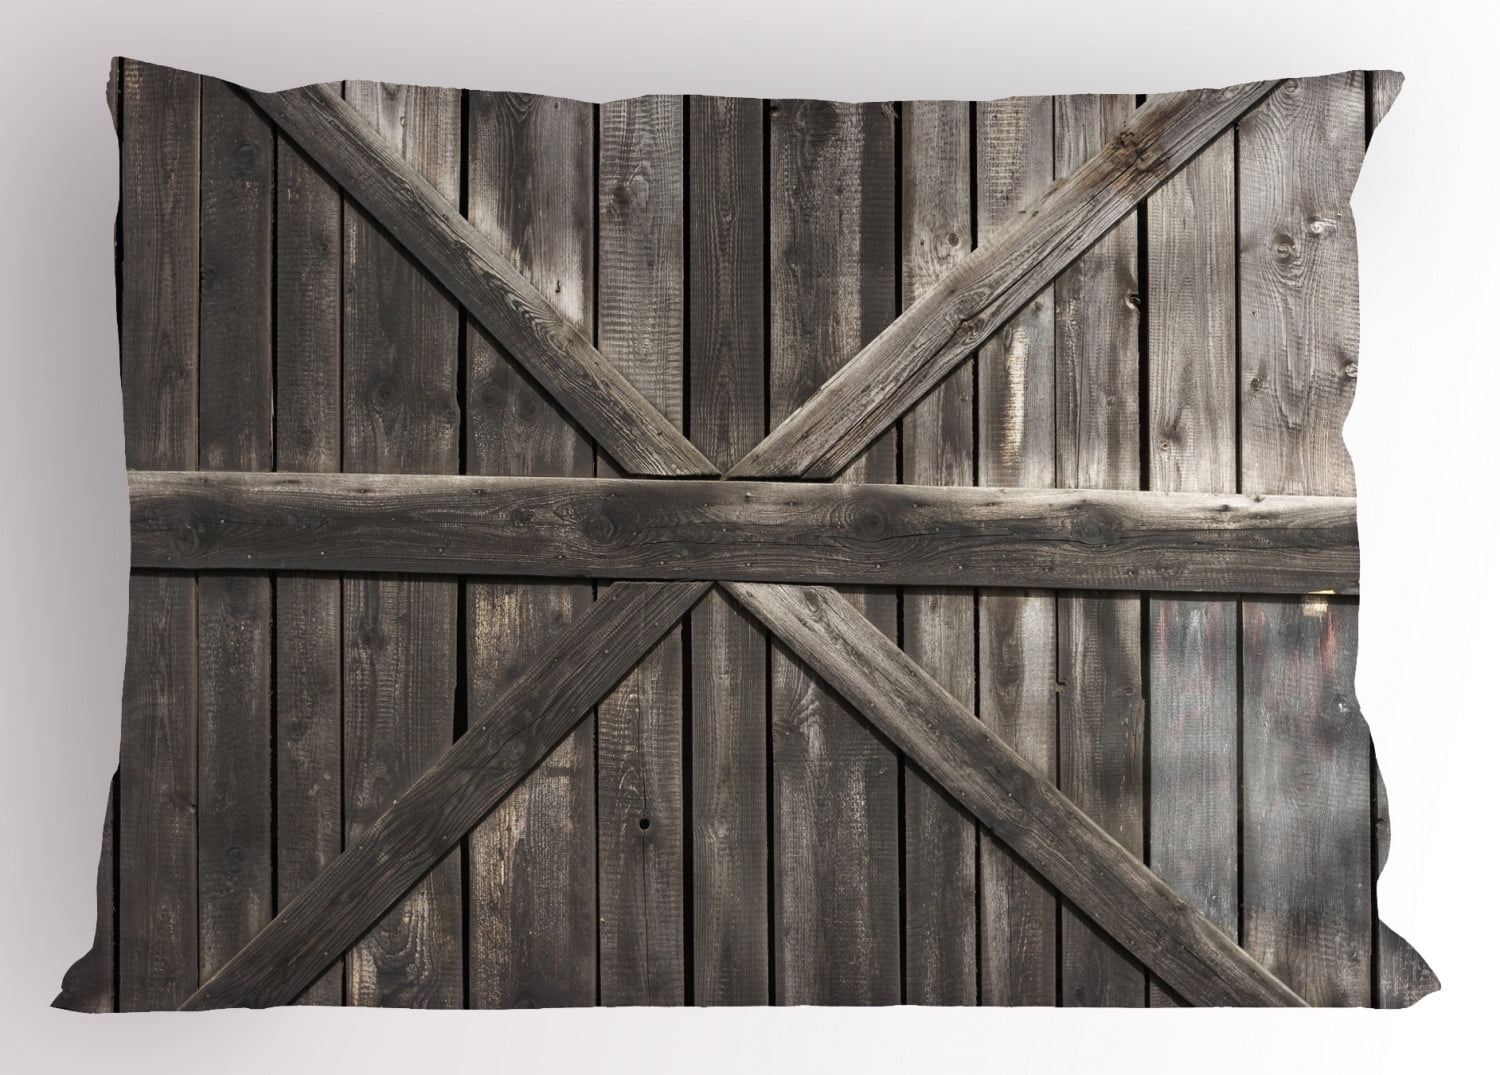 Rustic Pillow Sham Old Wooden Door With Big Cross Design Rustic Country Life Architecture Building Doorway Decorative Standard Size Printed Pillowcase 26 X 20 Inches Taupe By Ambesonne Walmart Com Walmart Com